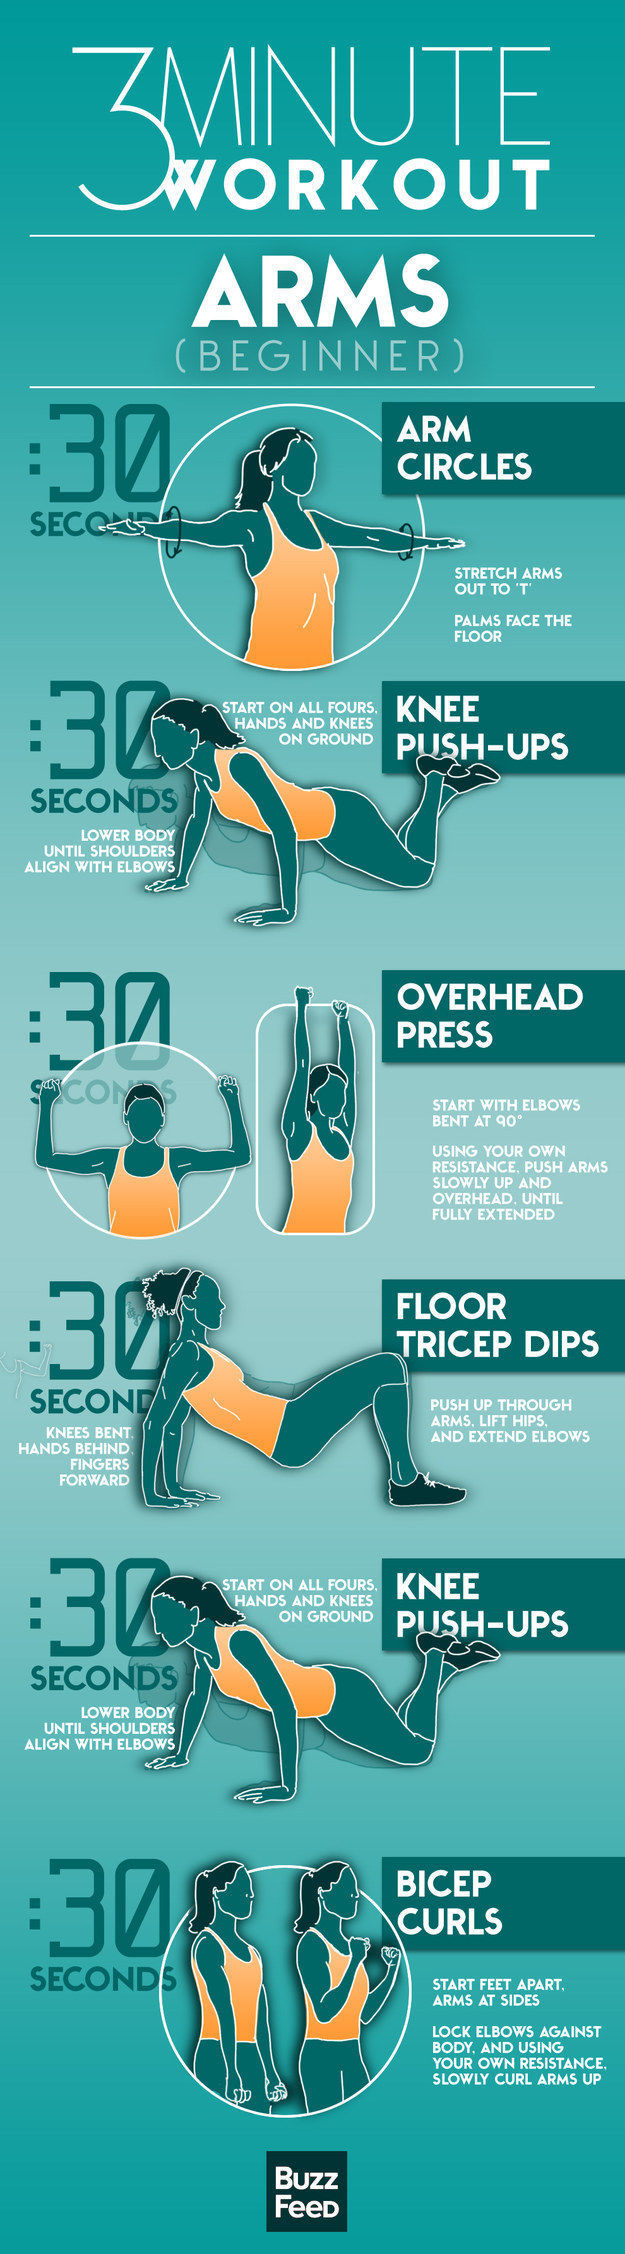 30 Minute Arm Workouts For Beginners At Home for Gym